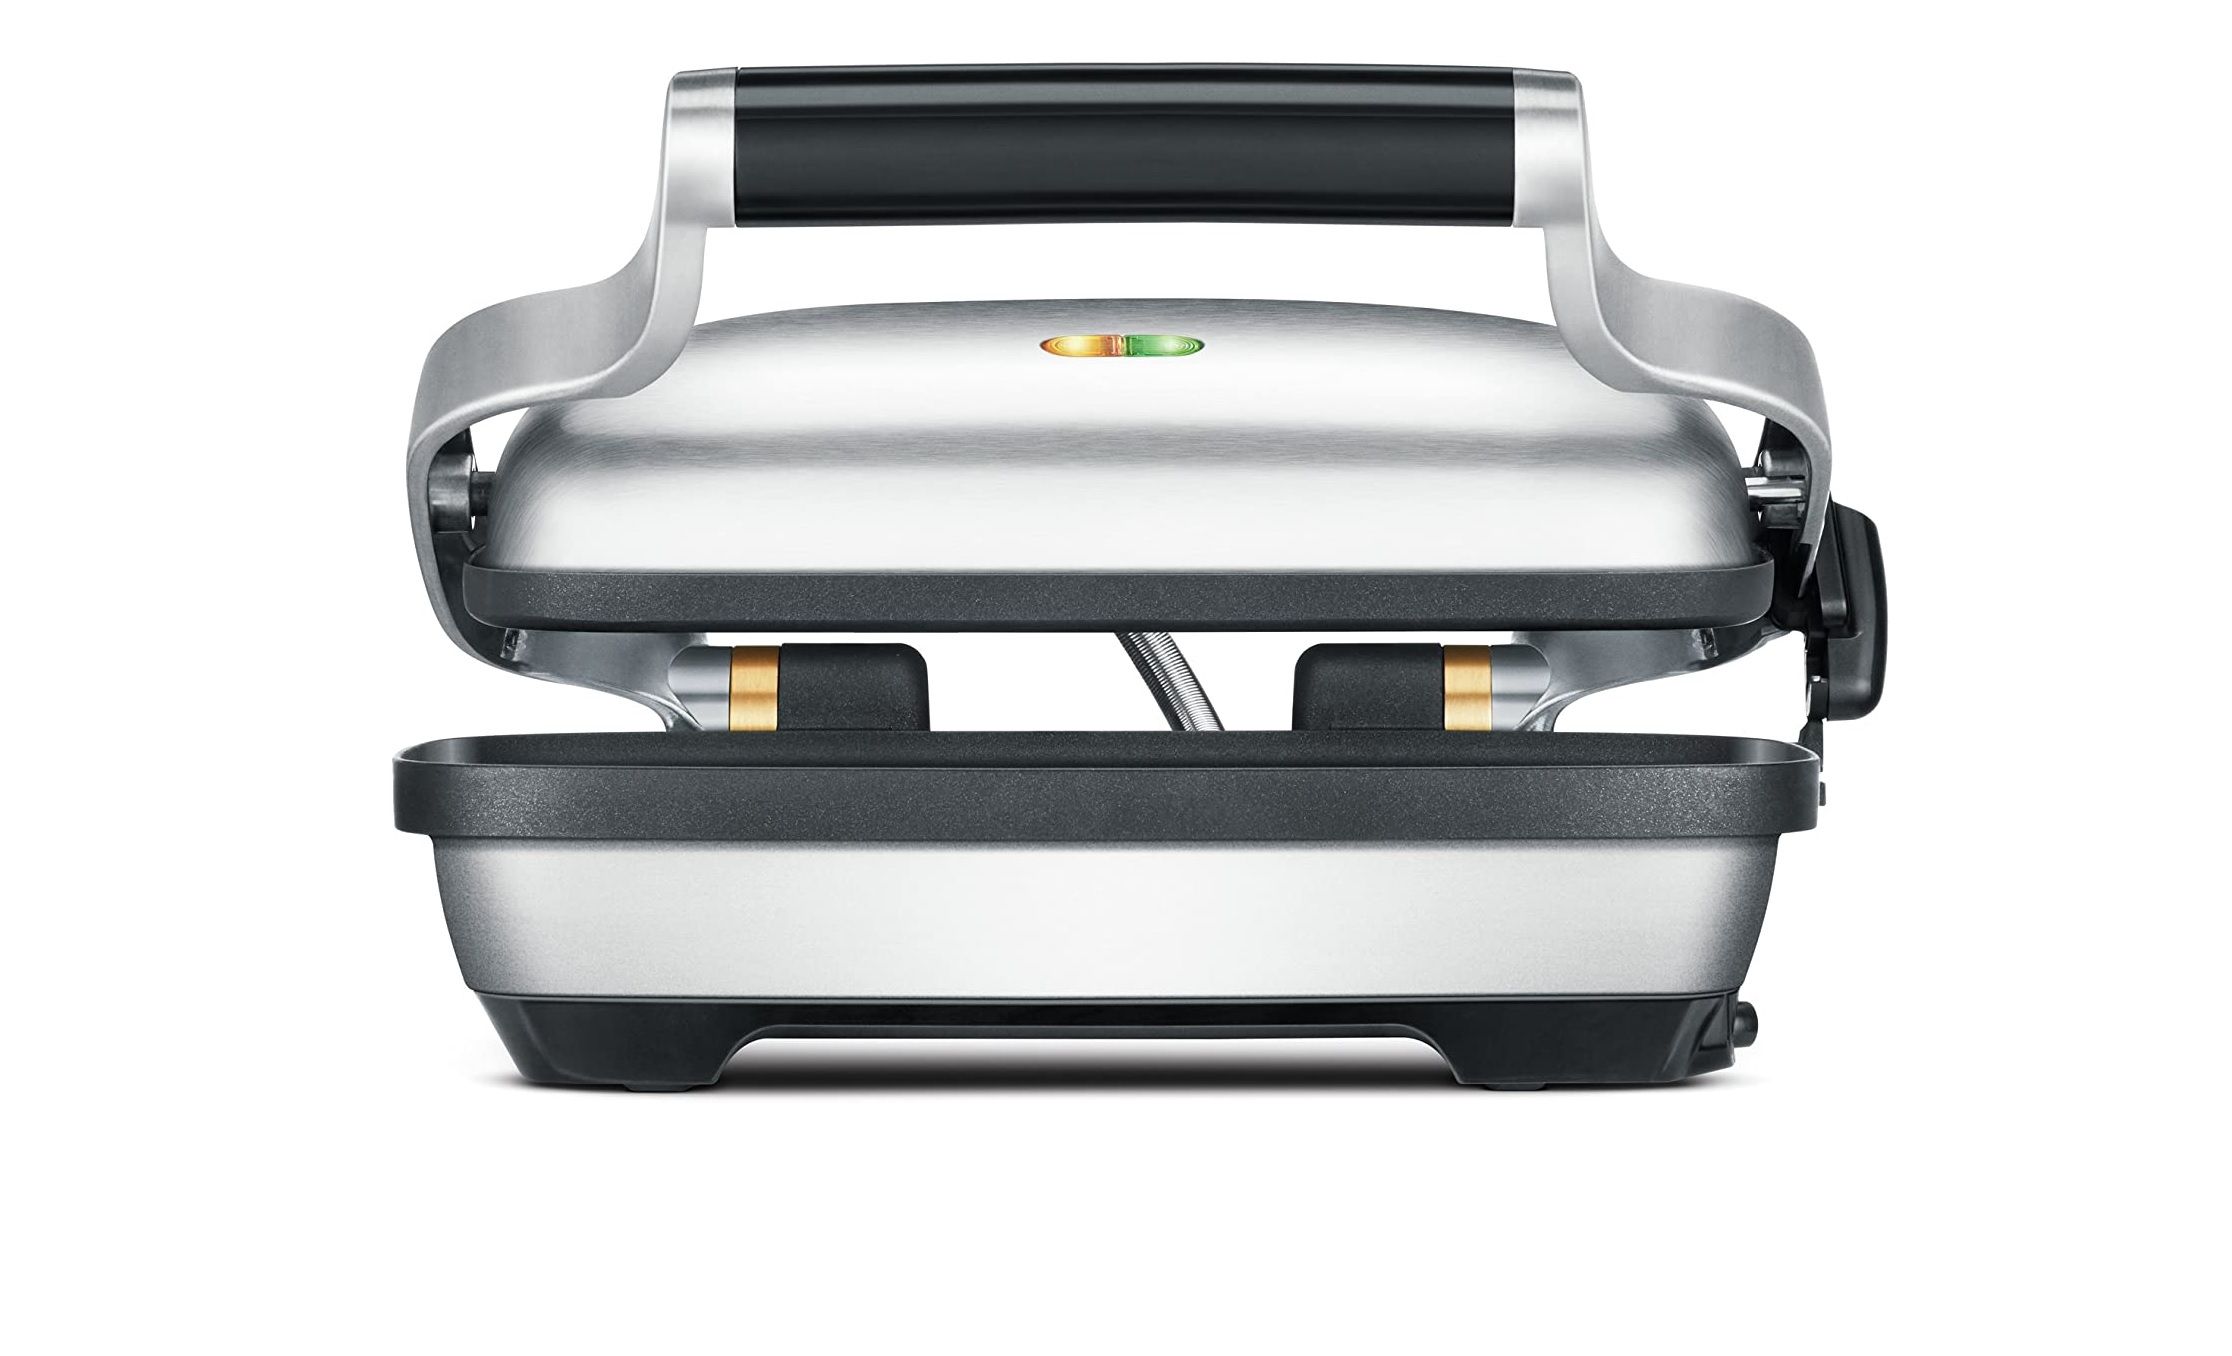 the breville bsg600bss panini press with stainless steel finish